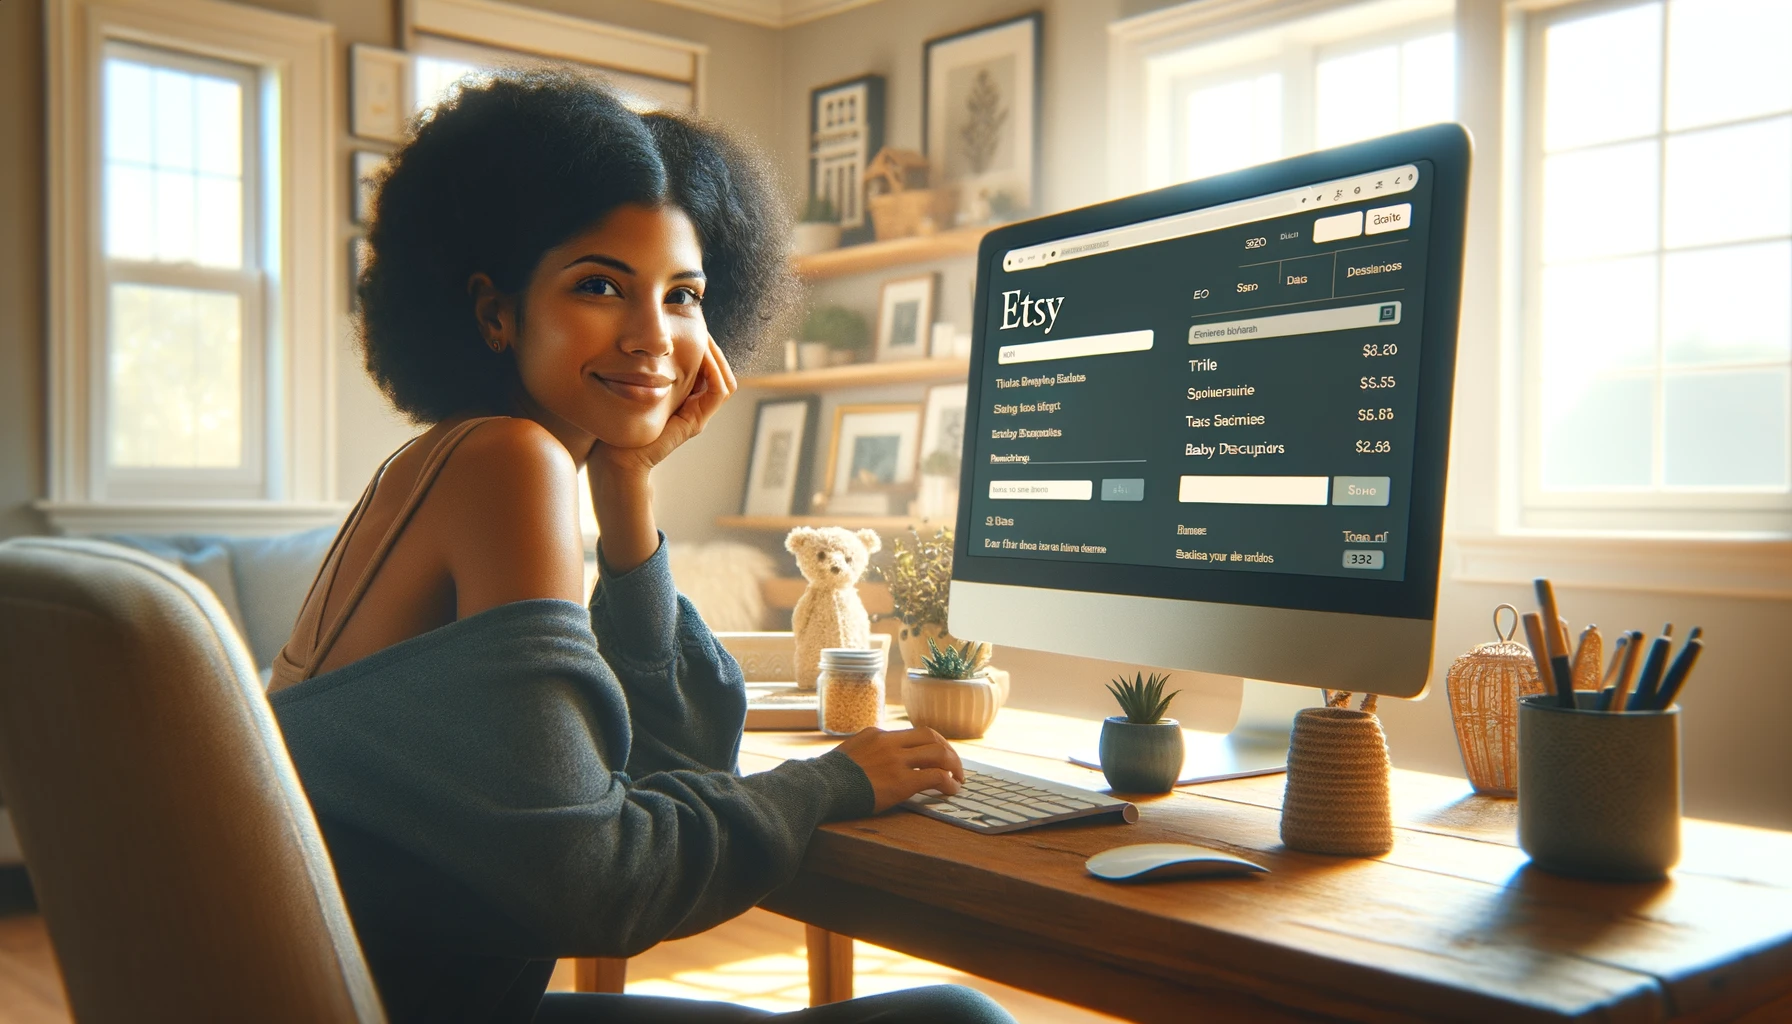 A female Etsy store owner of mixed descent is sitting slightly back from her computer screen in her home office, looking content and relaxed while working on SEO for her online store specializing in baby products. The Etsy interface on her computer screen is clearly visible, showing sections for title, tags, and descriptions. Her expression is one of satisfaction and happiness, indicating her love for her work. The home office is cozy yet professional, with stylish modern decor. The room is bathed in natural light, giving it a bright, inviting atmosphere. The image should be photorealistic, capturing the essence of a photo taken with a Canon EOS 5D Mark IV and a 50mm lens, slightly overexposed for a sunny and airy feel.